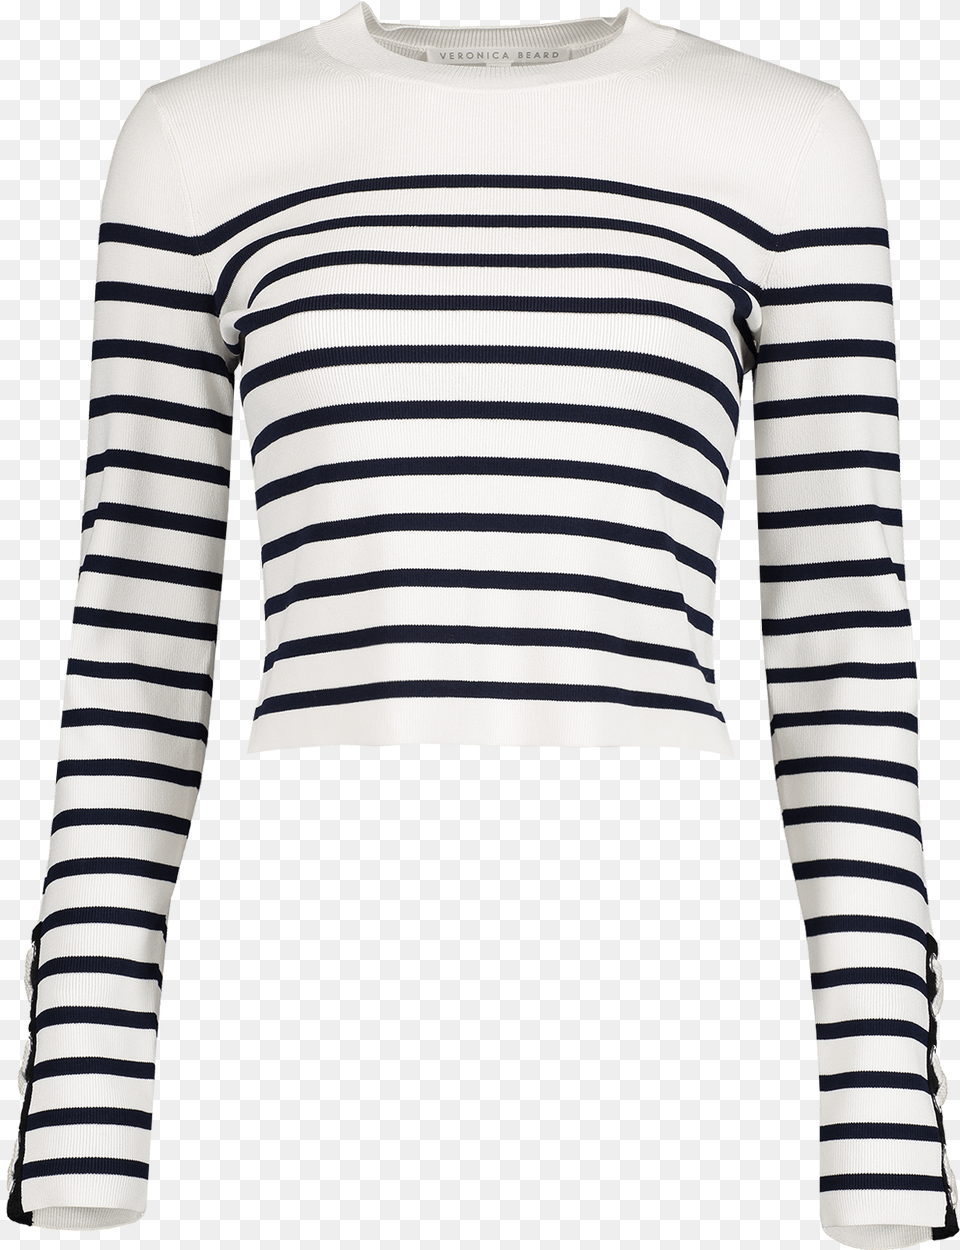 Veronica Beard Front Image Park Sweater Blouse, Clothing, Long Sleeve, Sleeve, T-shirt Png